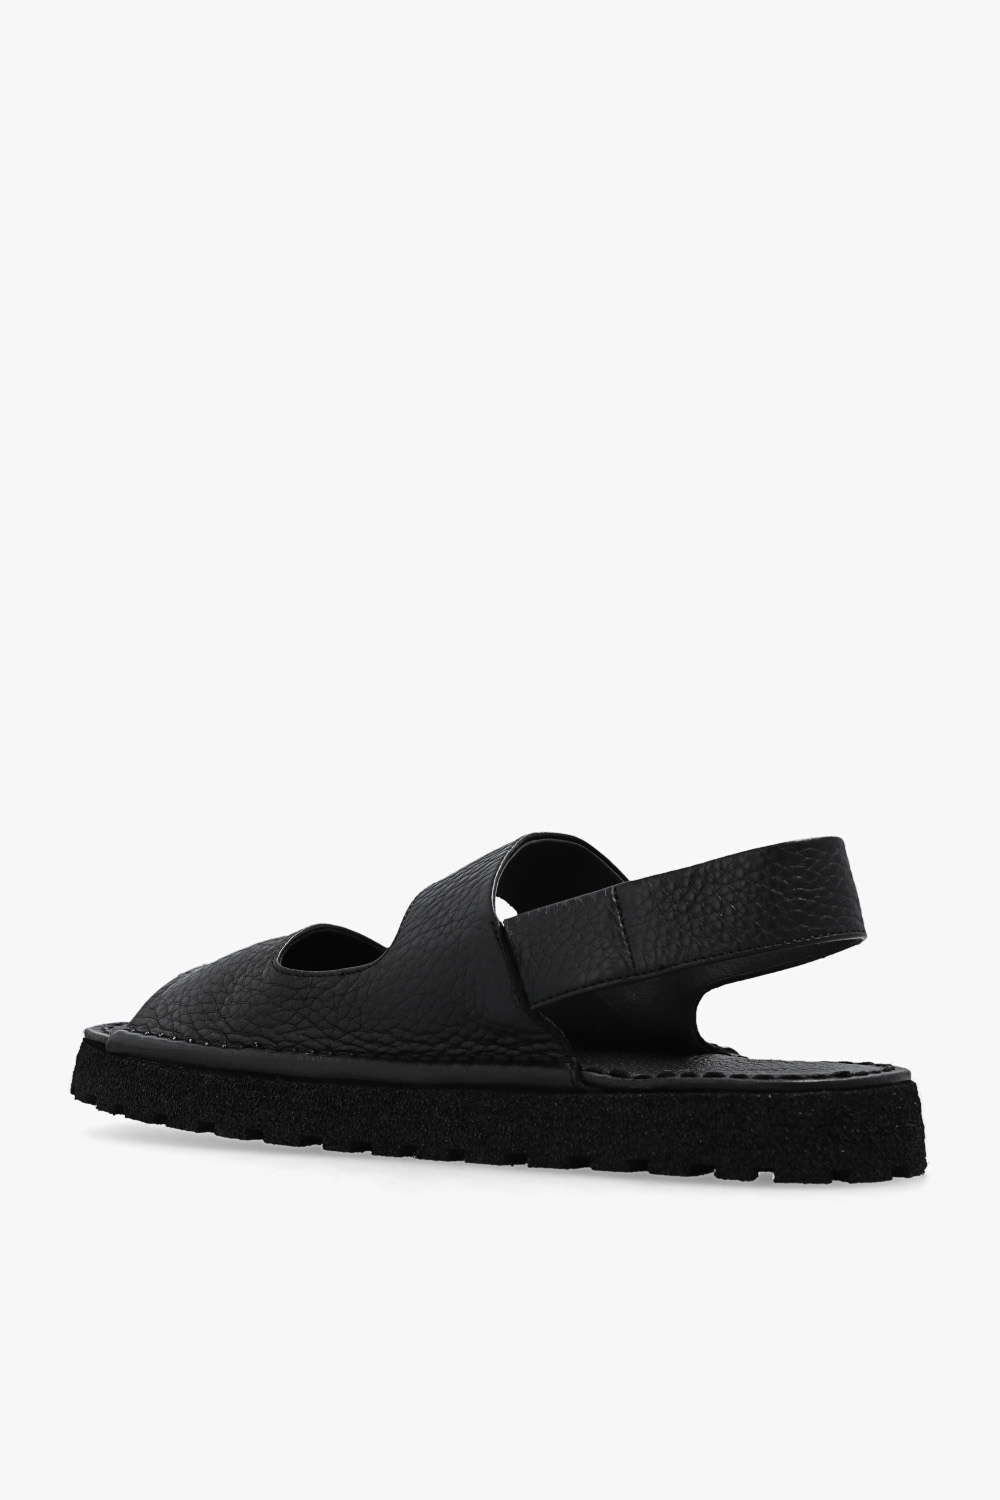 Marsell Leather sandals